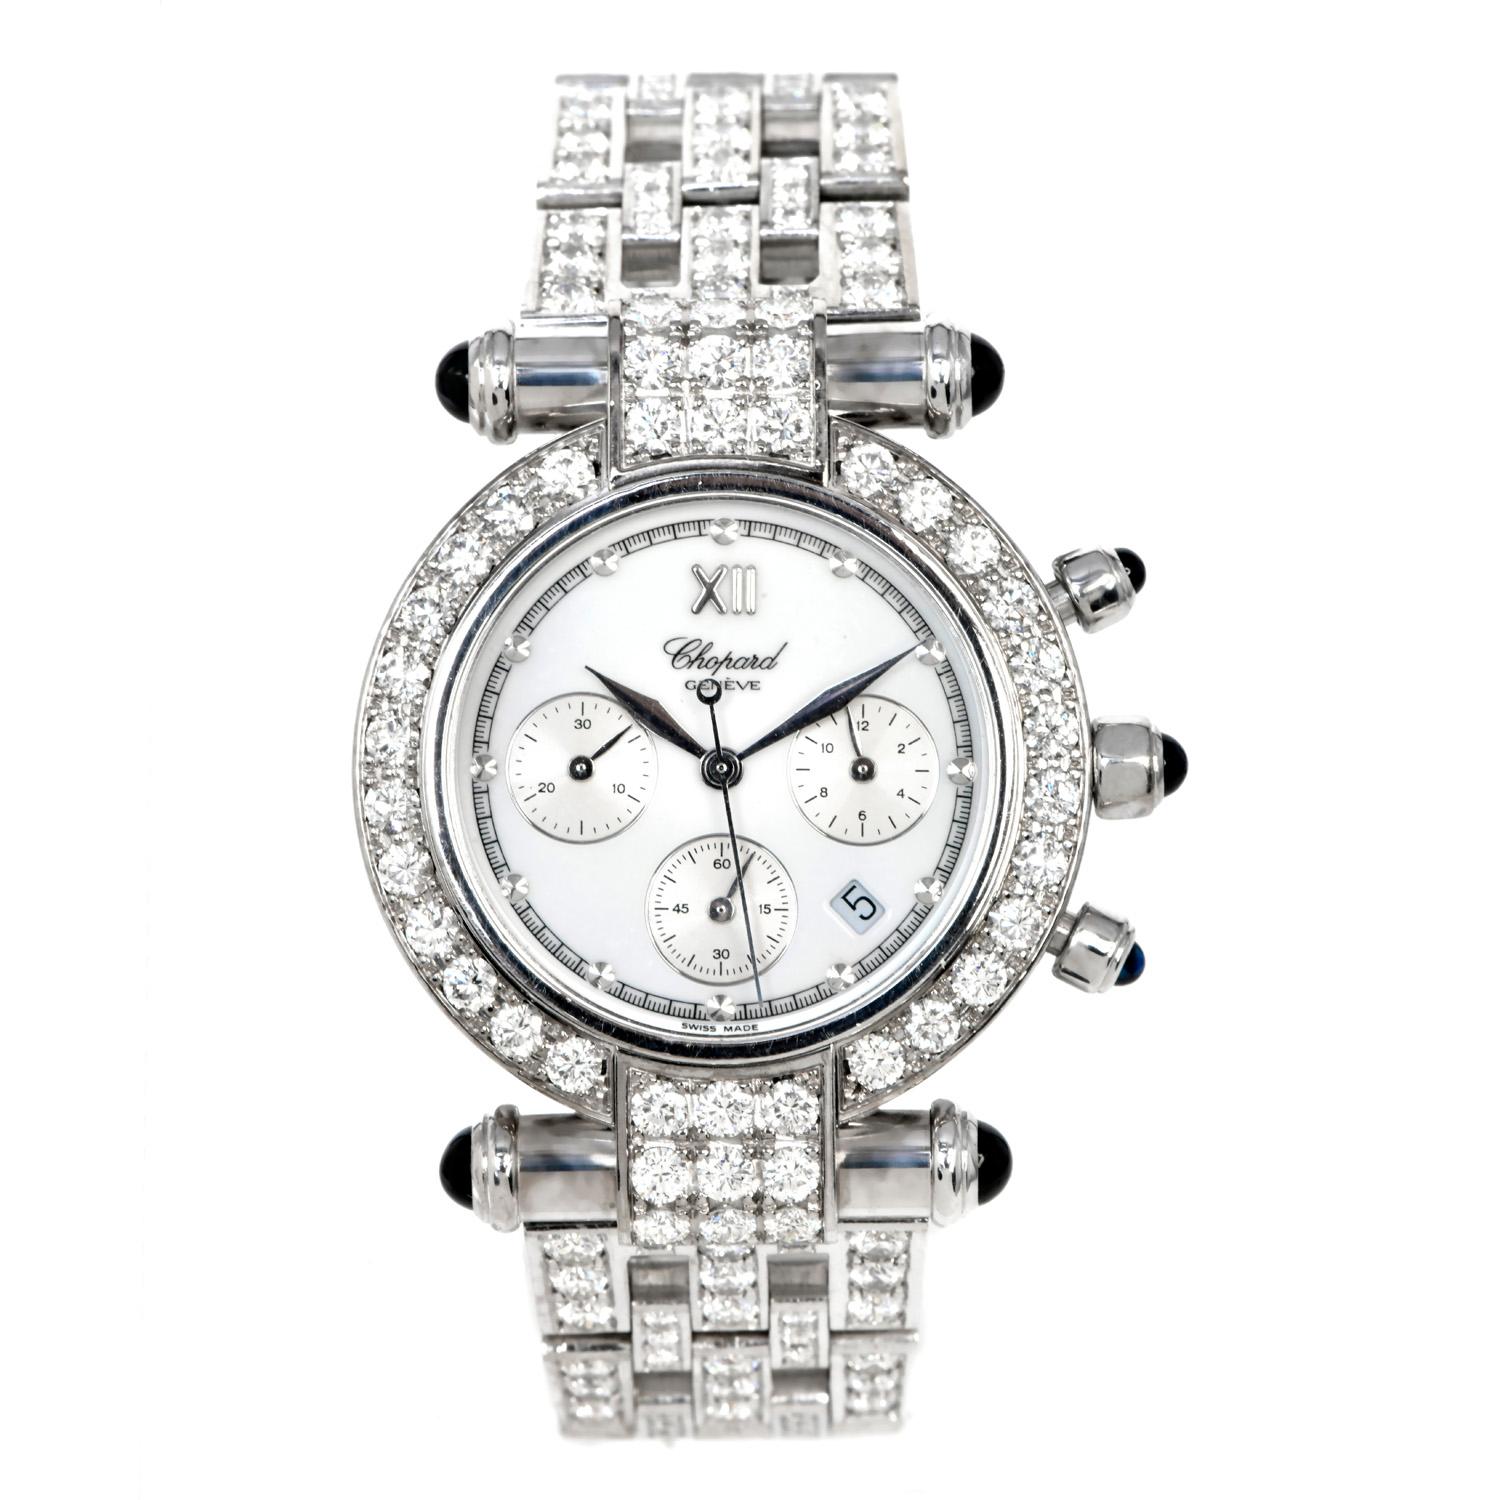 Exceedingly feminine, the IMPERIALE watches collection dazzles with the richness and delicacy of its details. It pays tribute to modern-day whose noble, majestic beauty is rivaled only by their conquering spirit. A tribute to modern achievers.

This